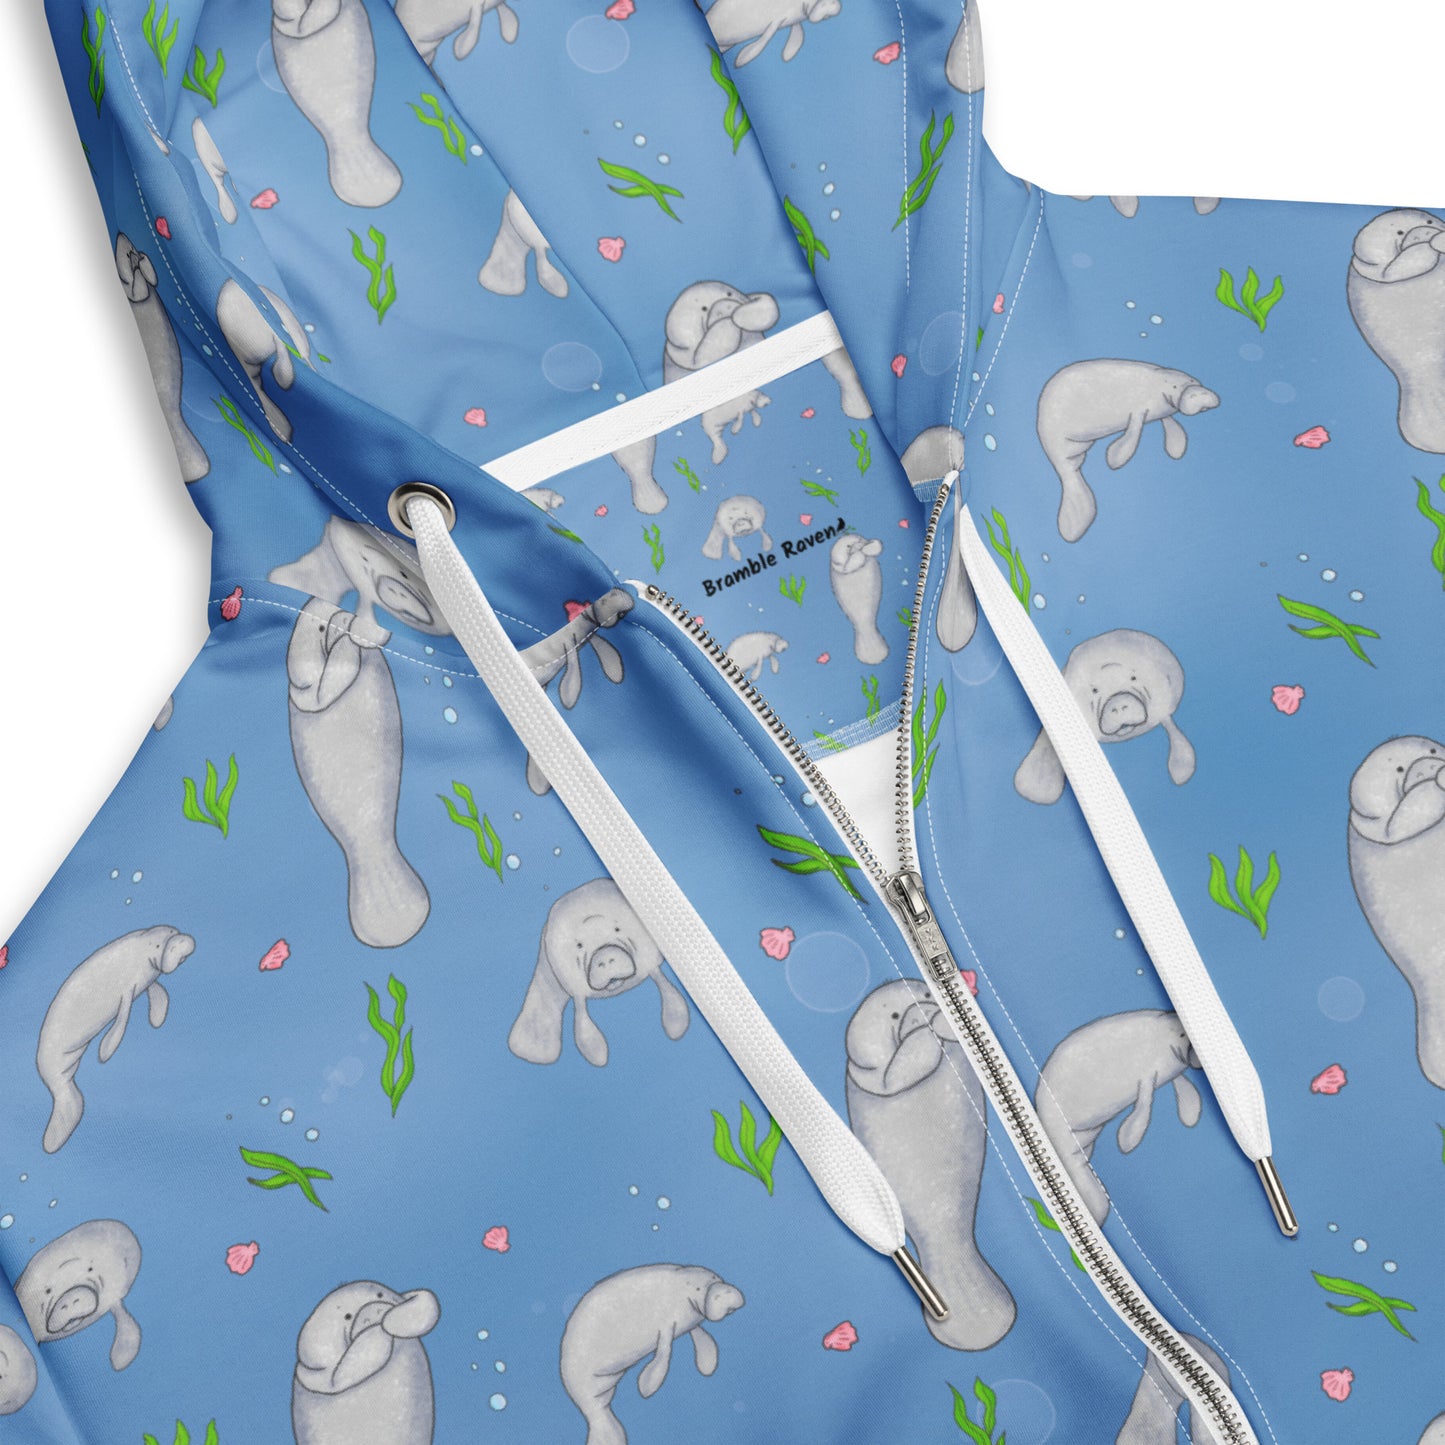 Unisex patterned manatee zip up hoodie. Made with recycled polyester. Soft cotton-feel outside fabric and fleece inside. Metal zipper, eyelets, and drawcord tips. Detail view of drawcords and zipper.